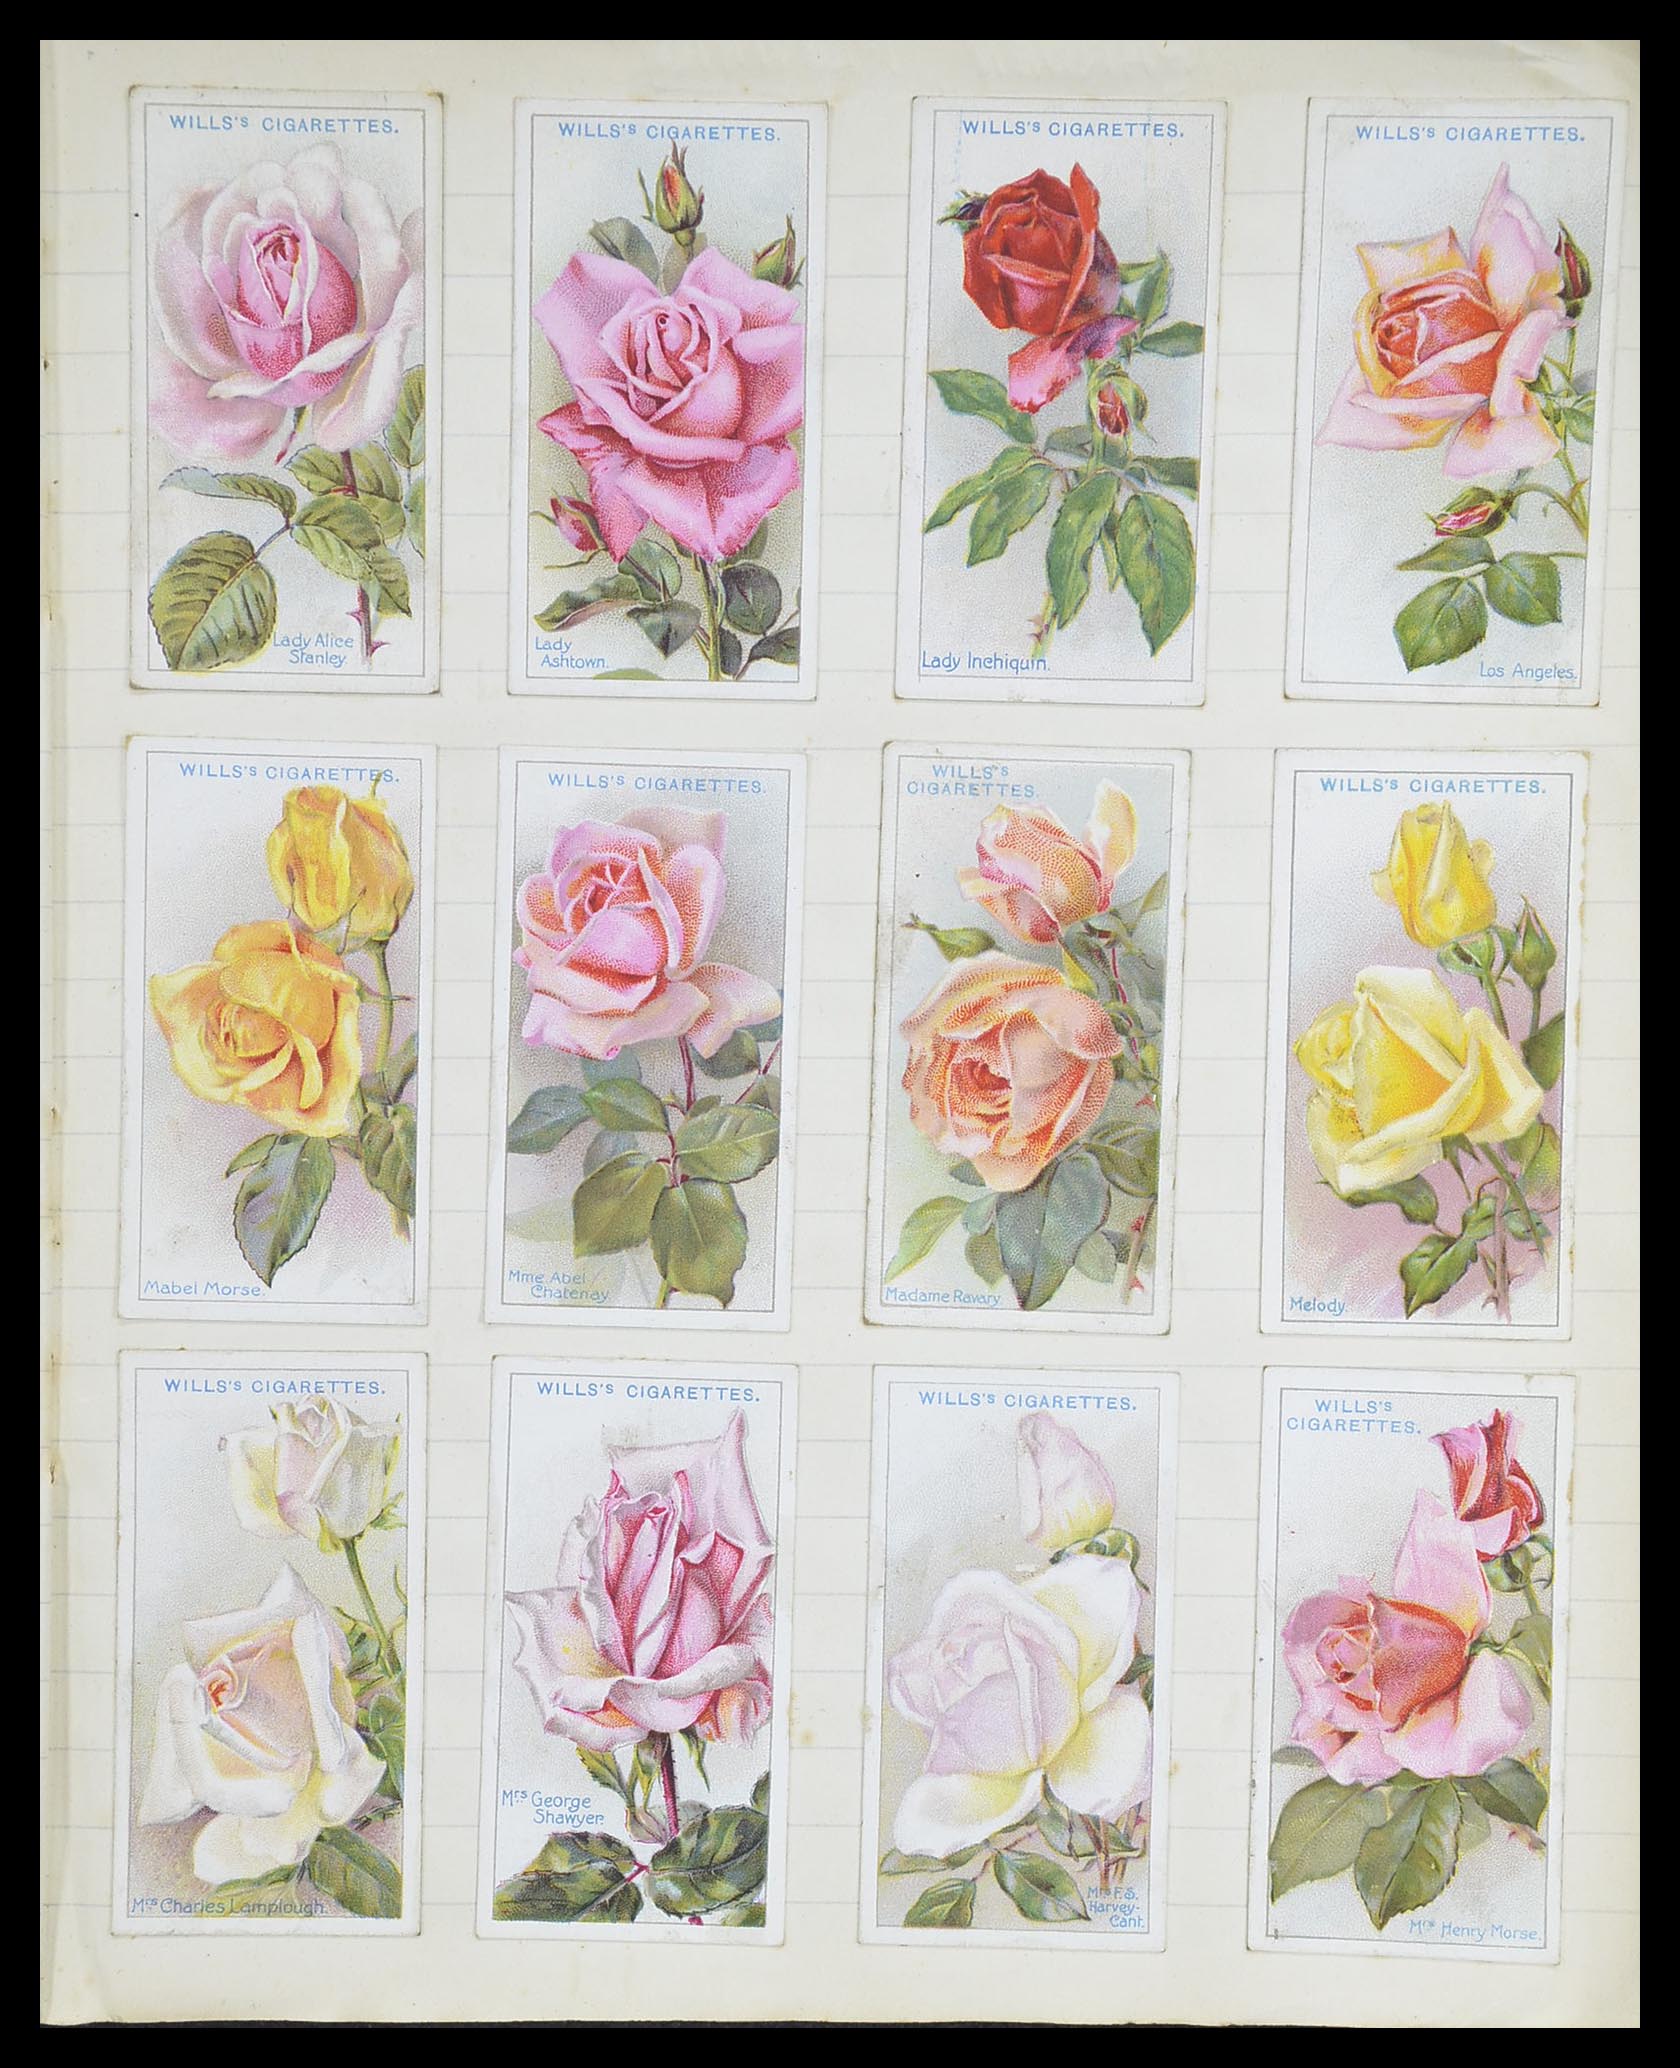 33444 073 - Stamp collection 33444 Great Britain cigarette cards.